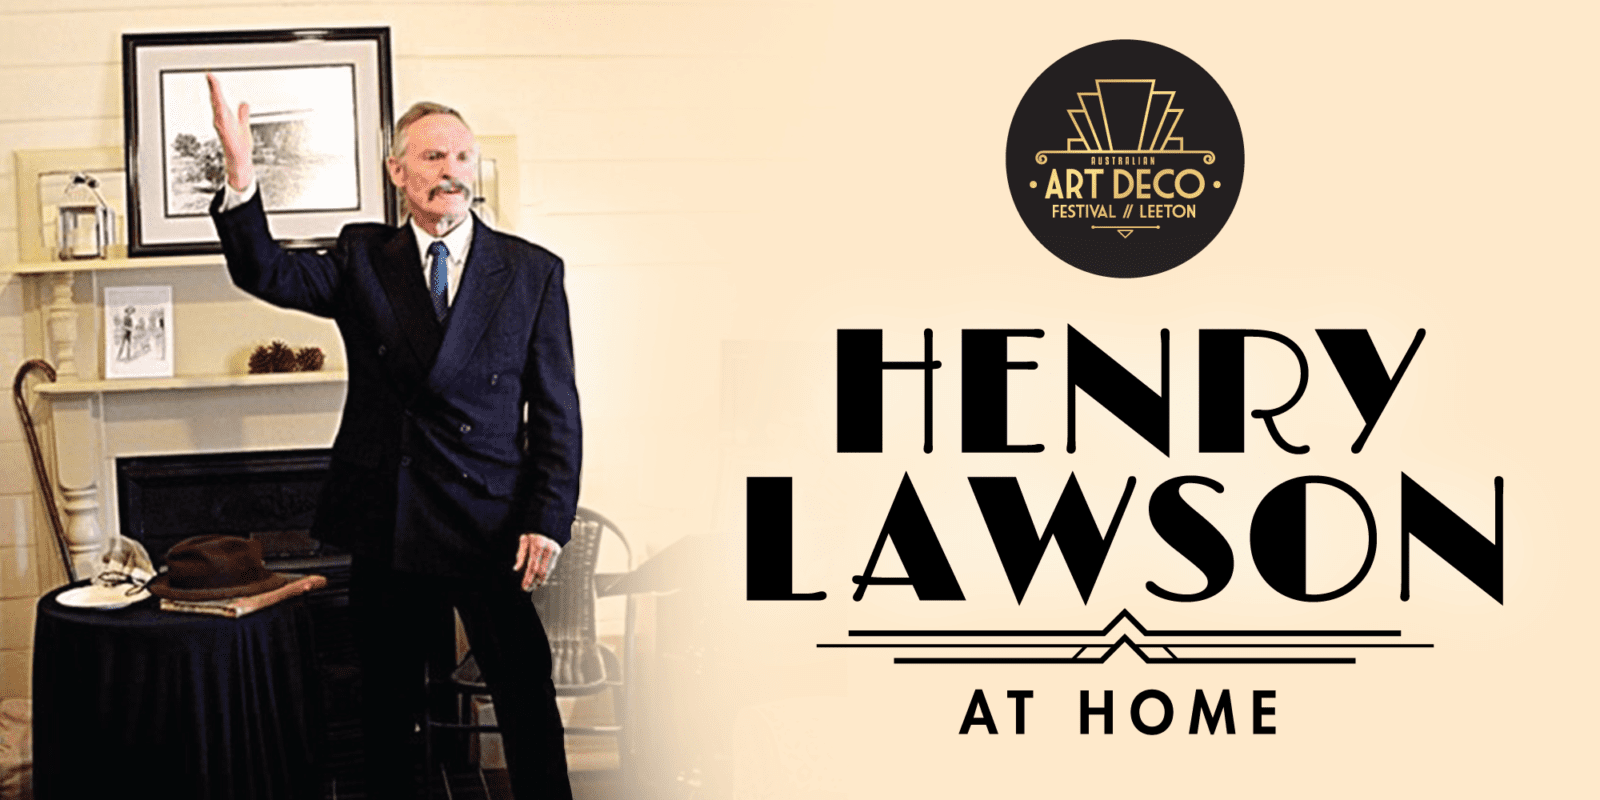 art deco festival event henry lawson at home banner.png